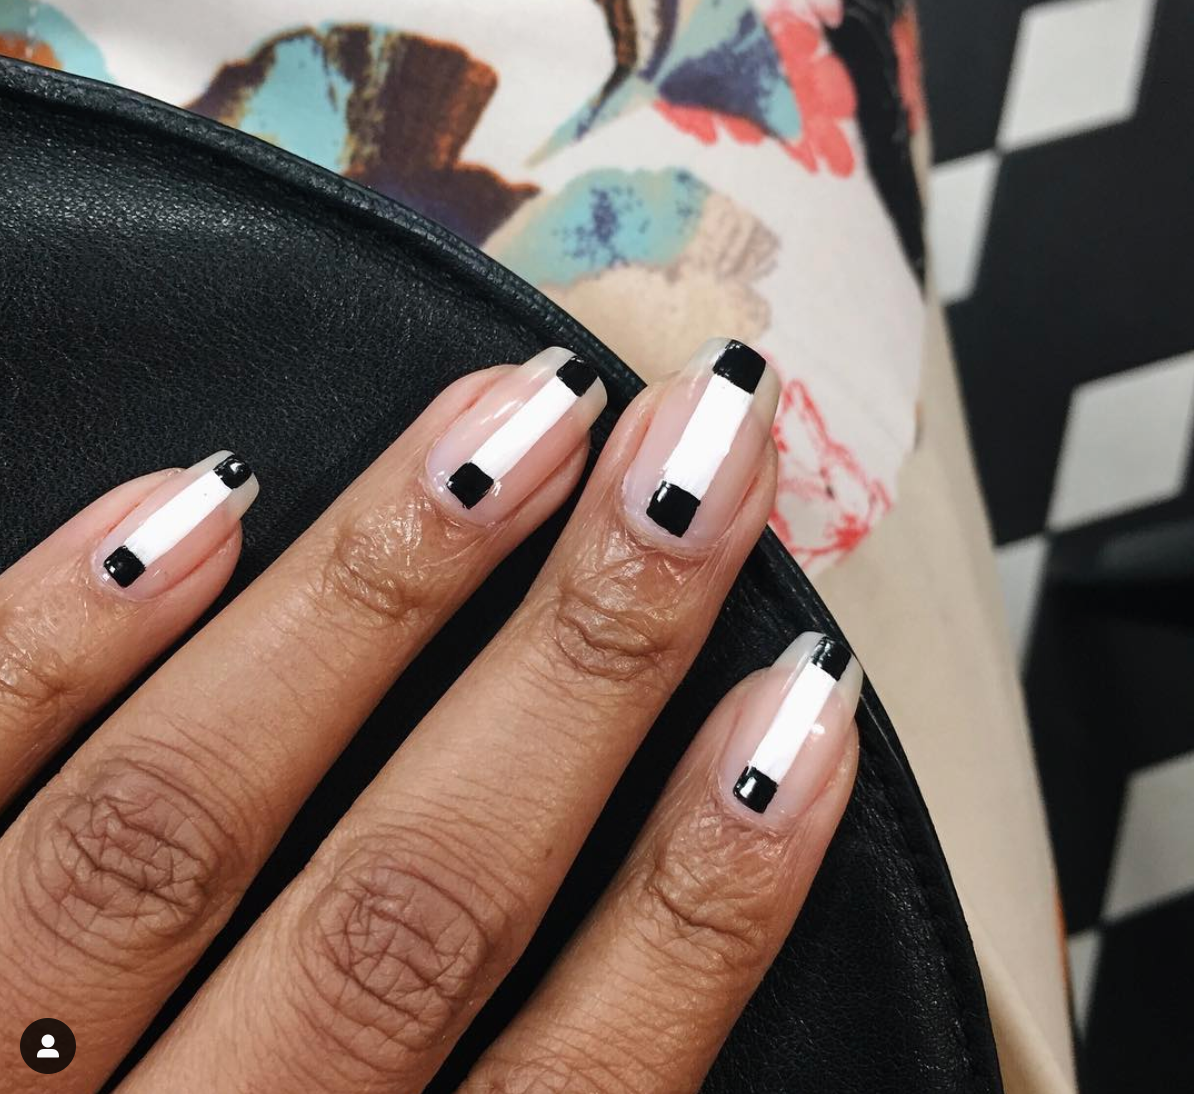 Tiffany M. Battle’s Nails Are What Hand Goals Are Made Of